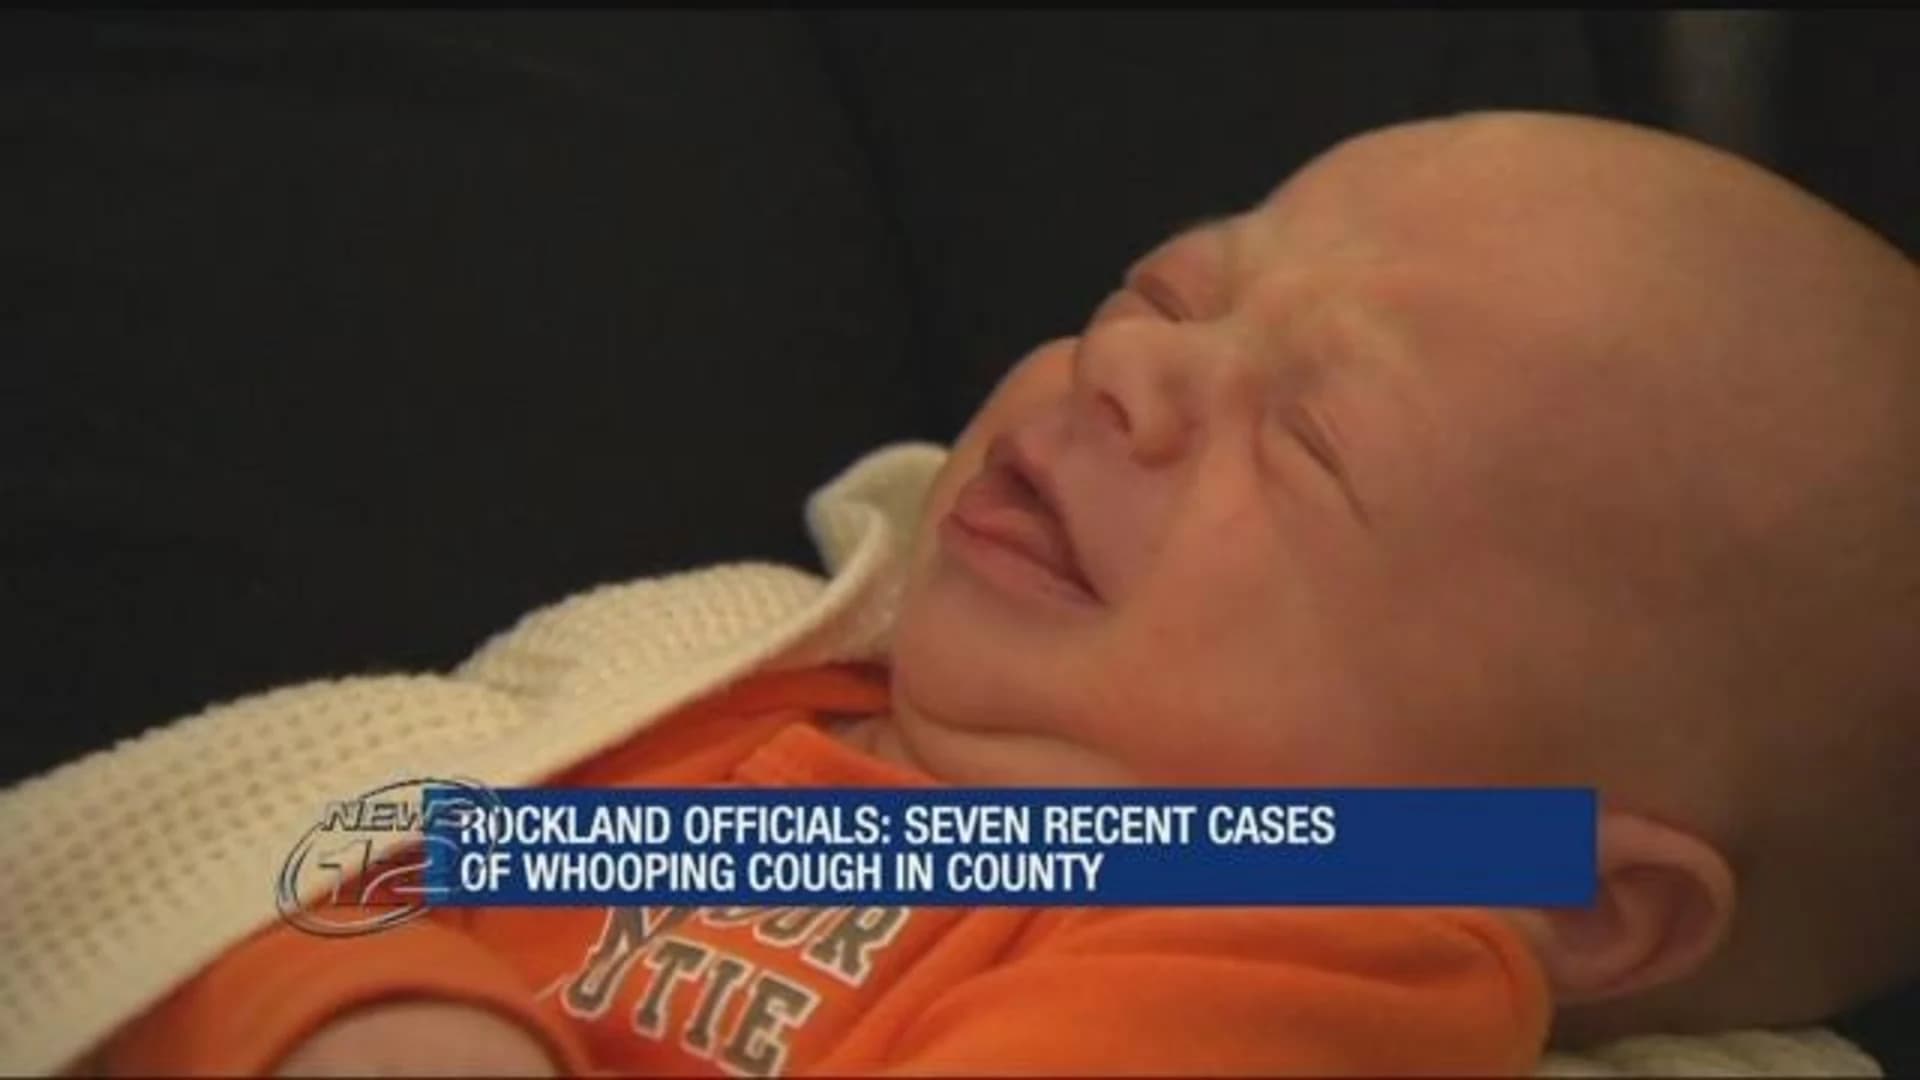 Highly contagious whooping cough found in Rockland County